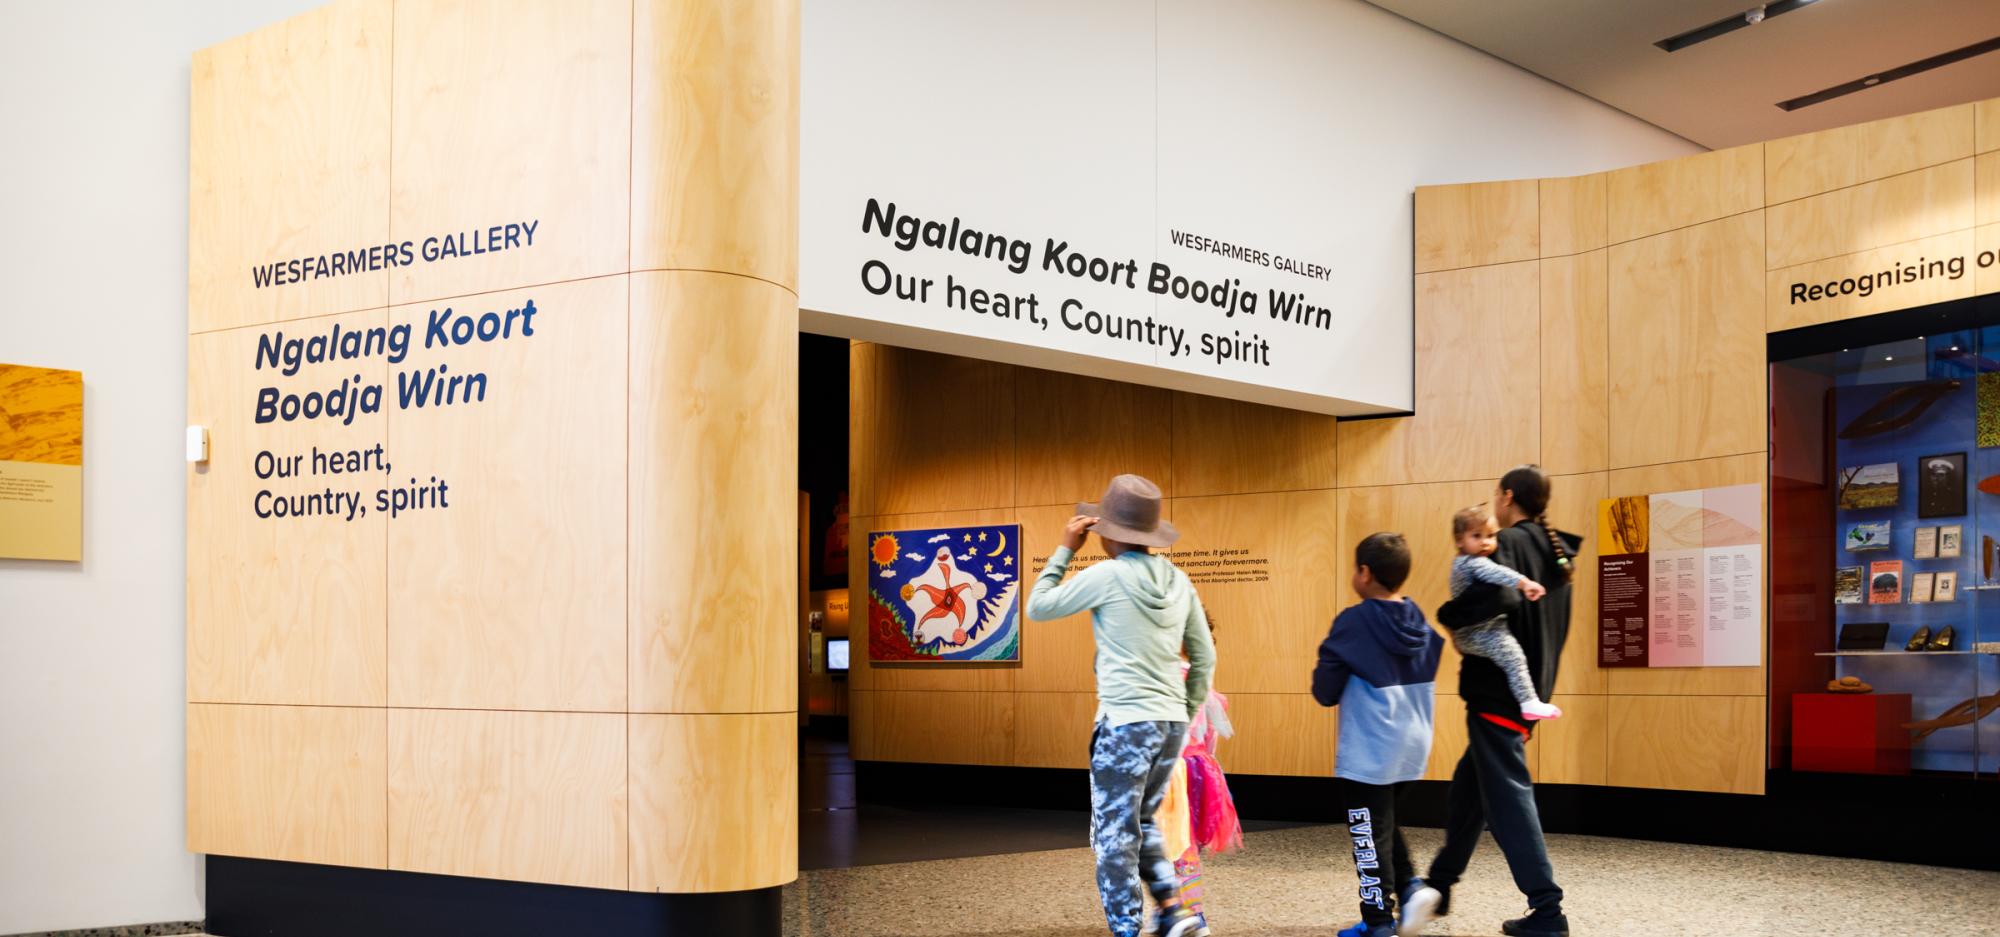 Entrance to Wesfarmers Gallery with wood paneling and text 'Ngalang Koort Boodja Wirn: Our heart, Country, spirit.' Five visitors approach the entrance.